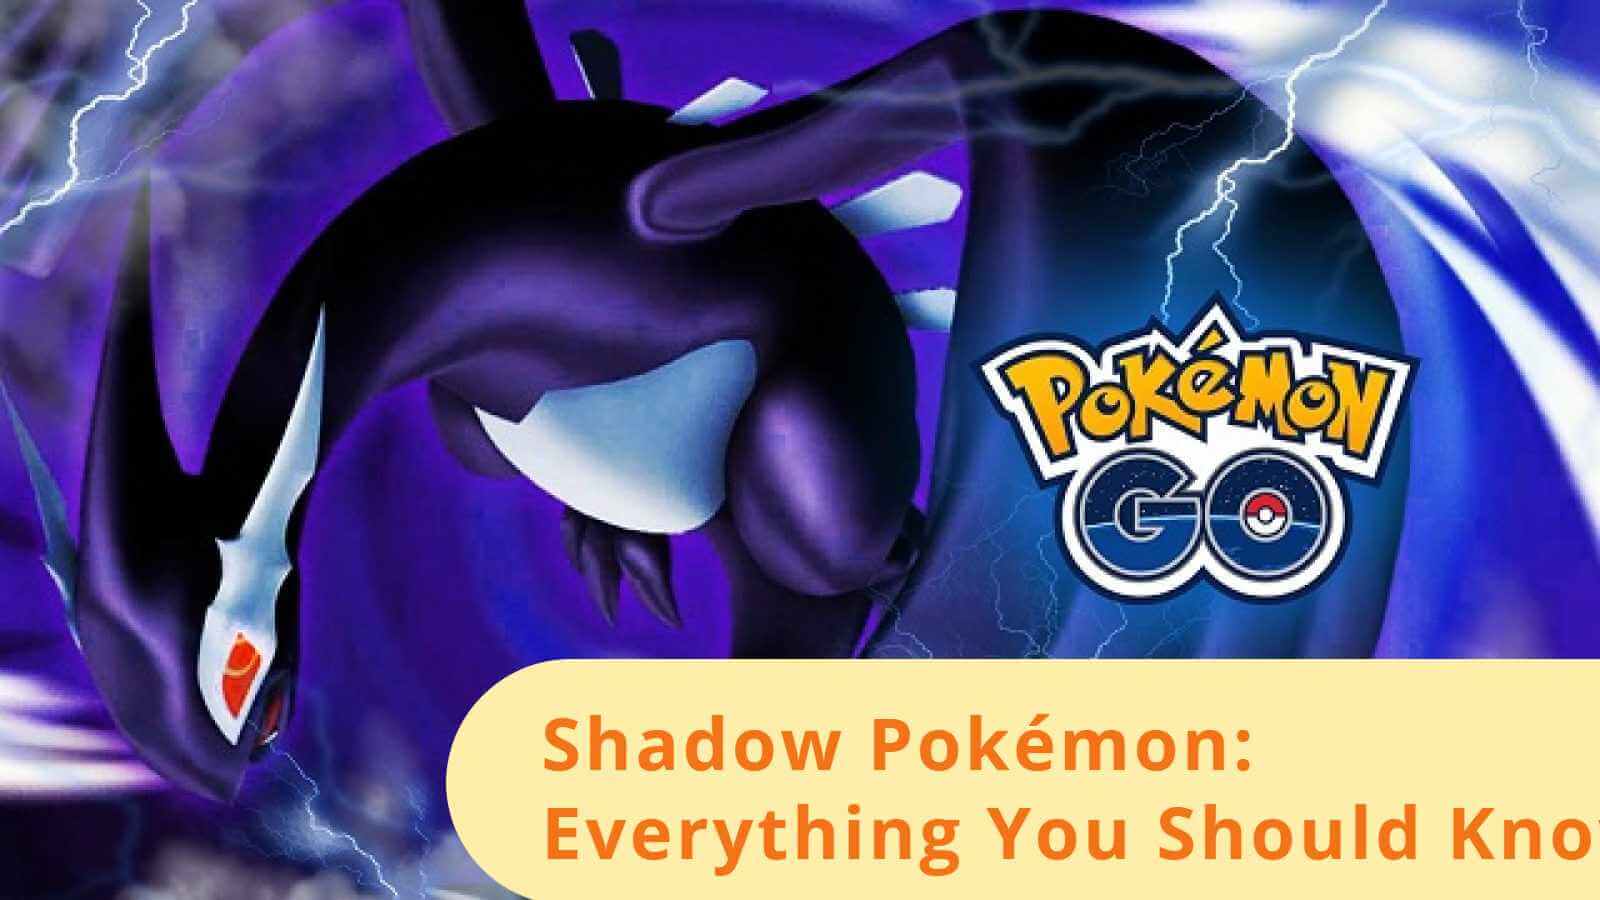 Shadow Mewtwo In Pokémon GO: To Purify Or Not To Purify? in 2023